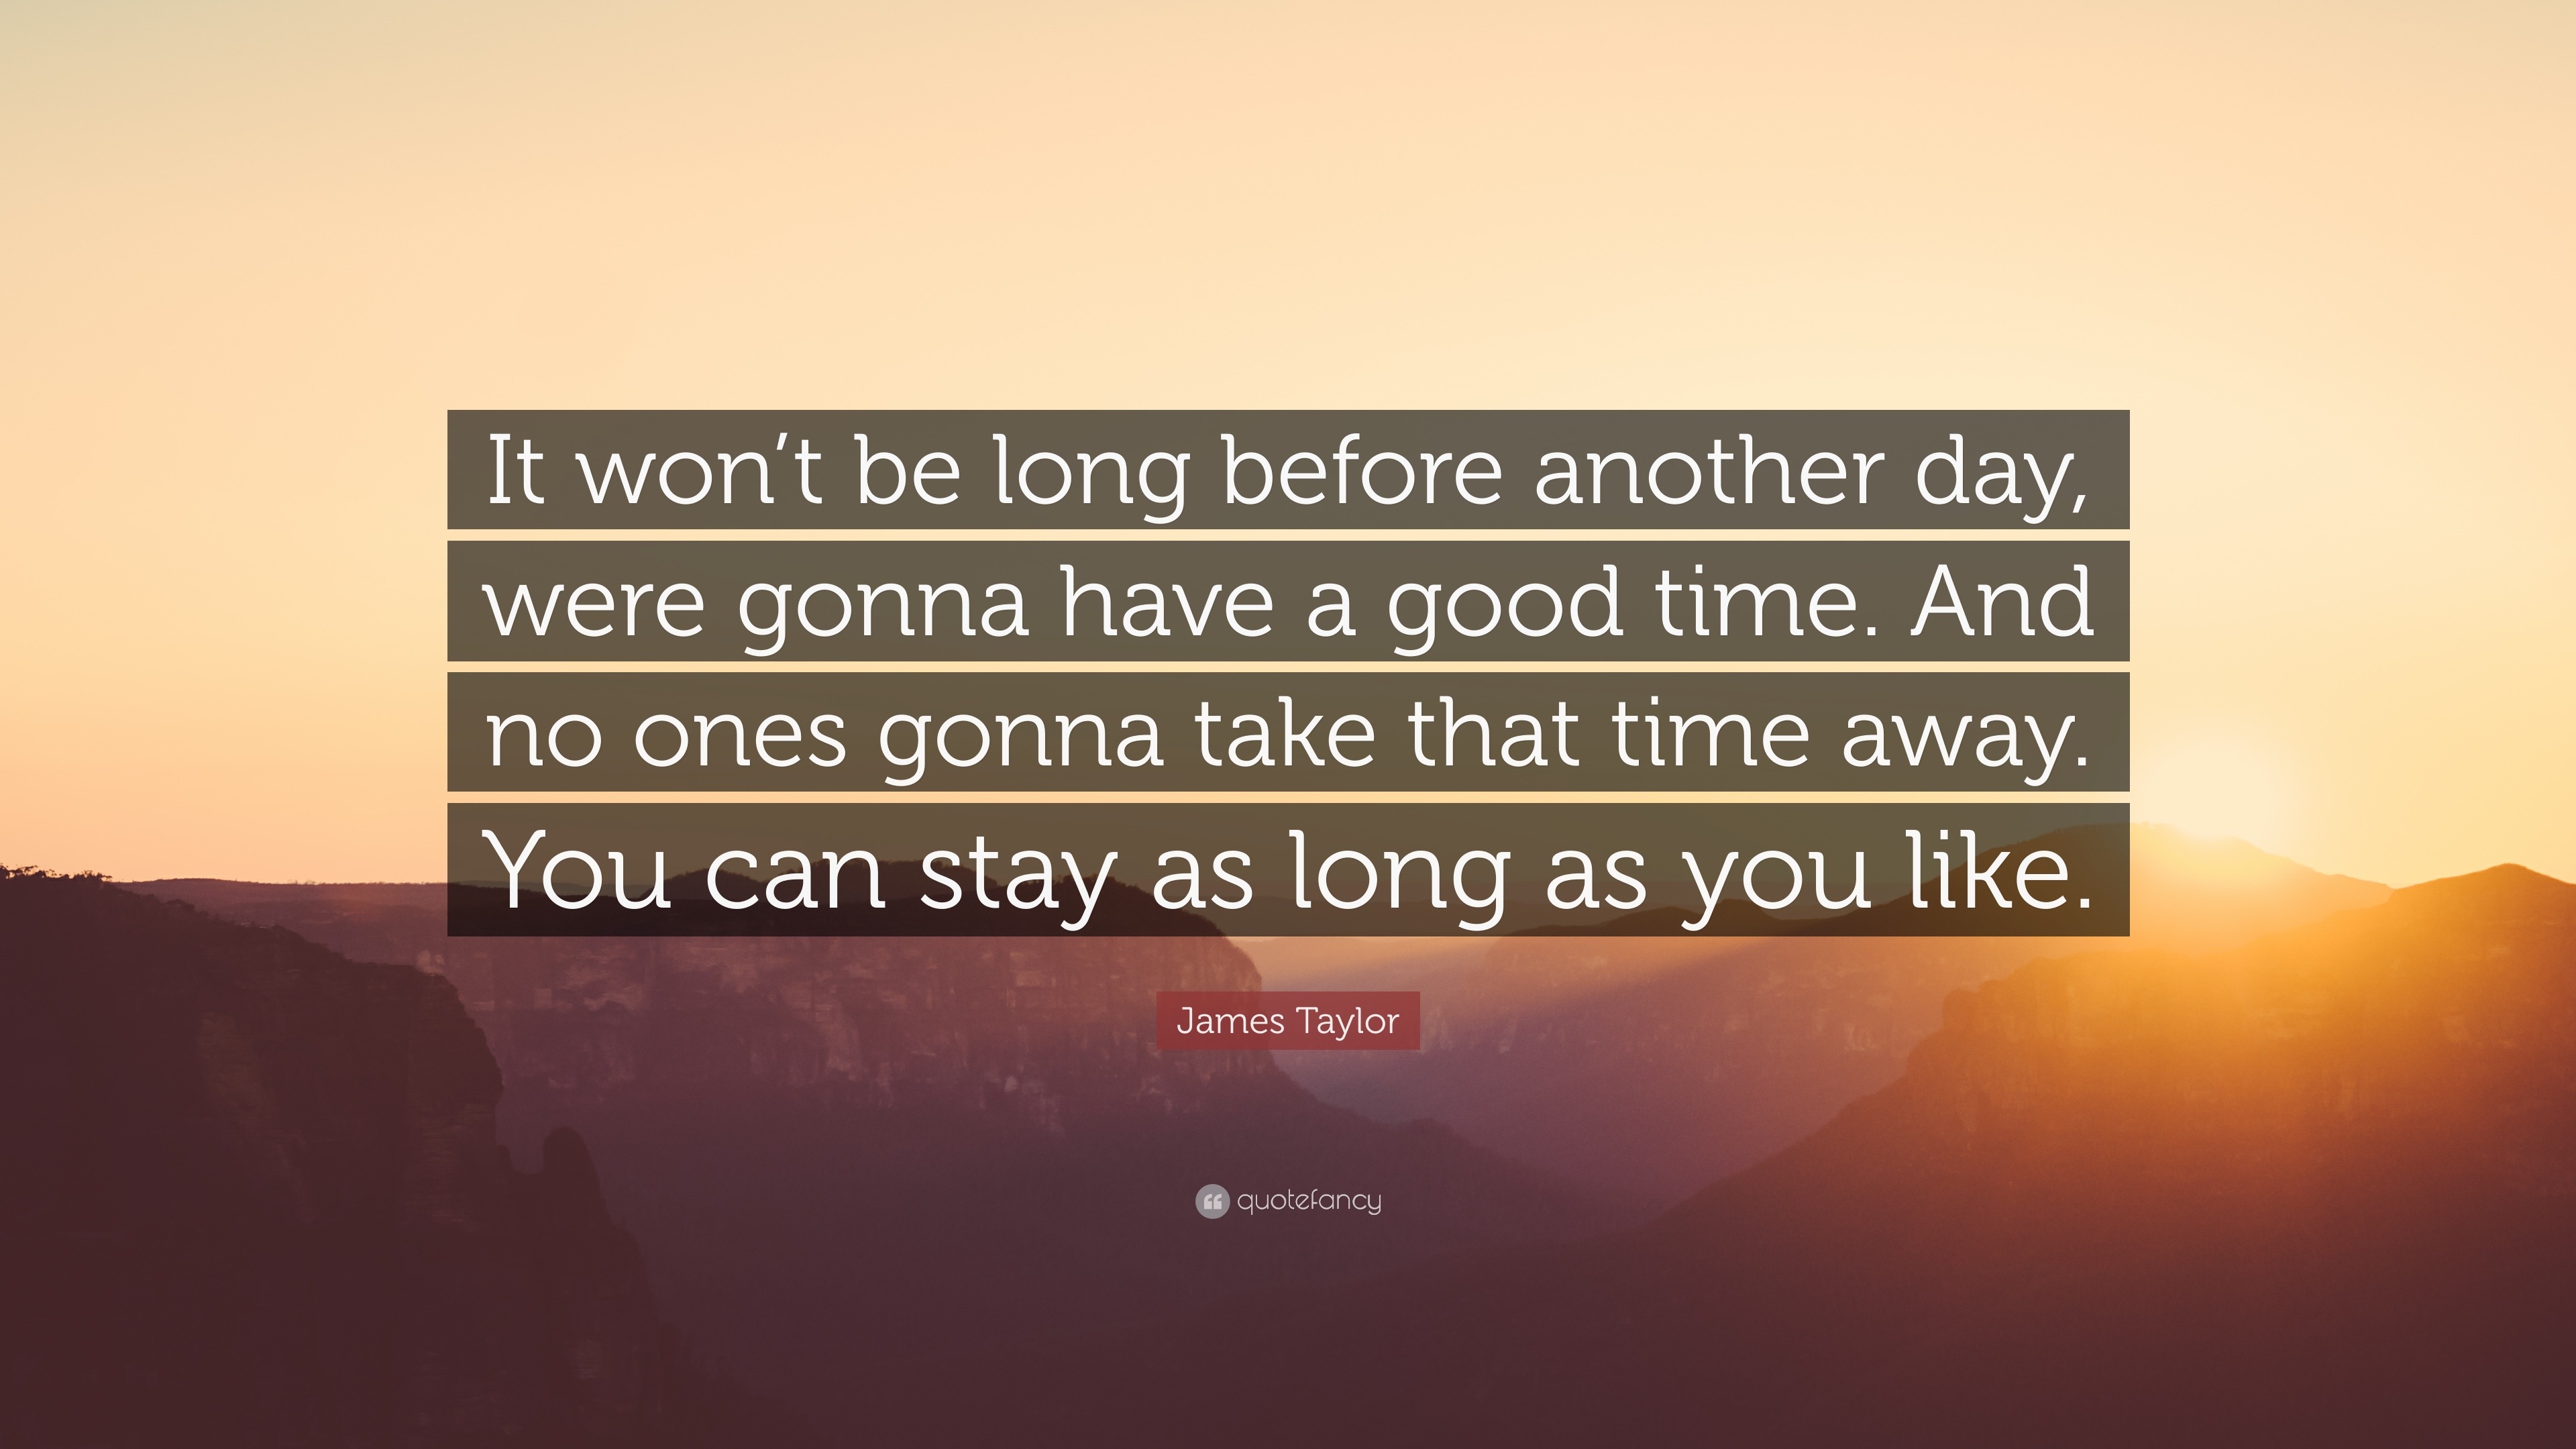 James Taylor Quote: “It won't be long before another day, were gonna have a good time. And no gonna take that time away. You can as...”